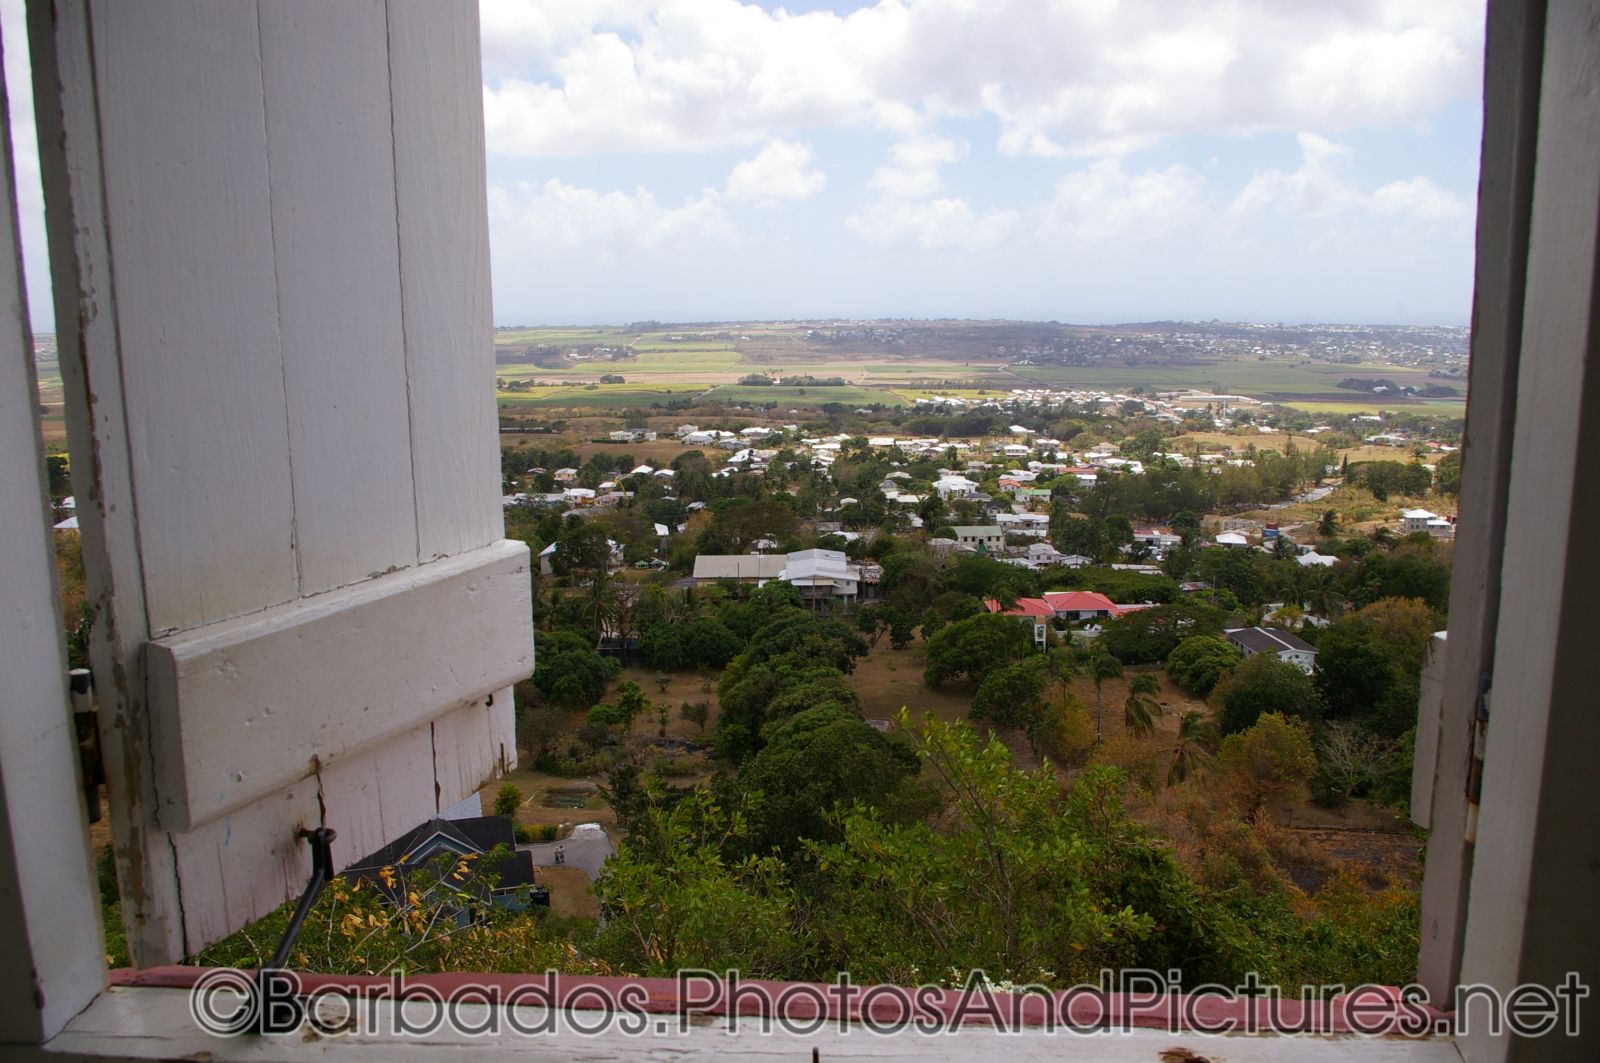 Looking out through a window at the Gun Hill Signal Station tower in Barbados.jpg
